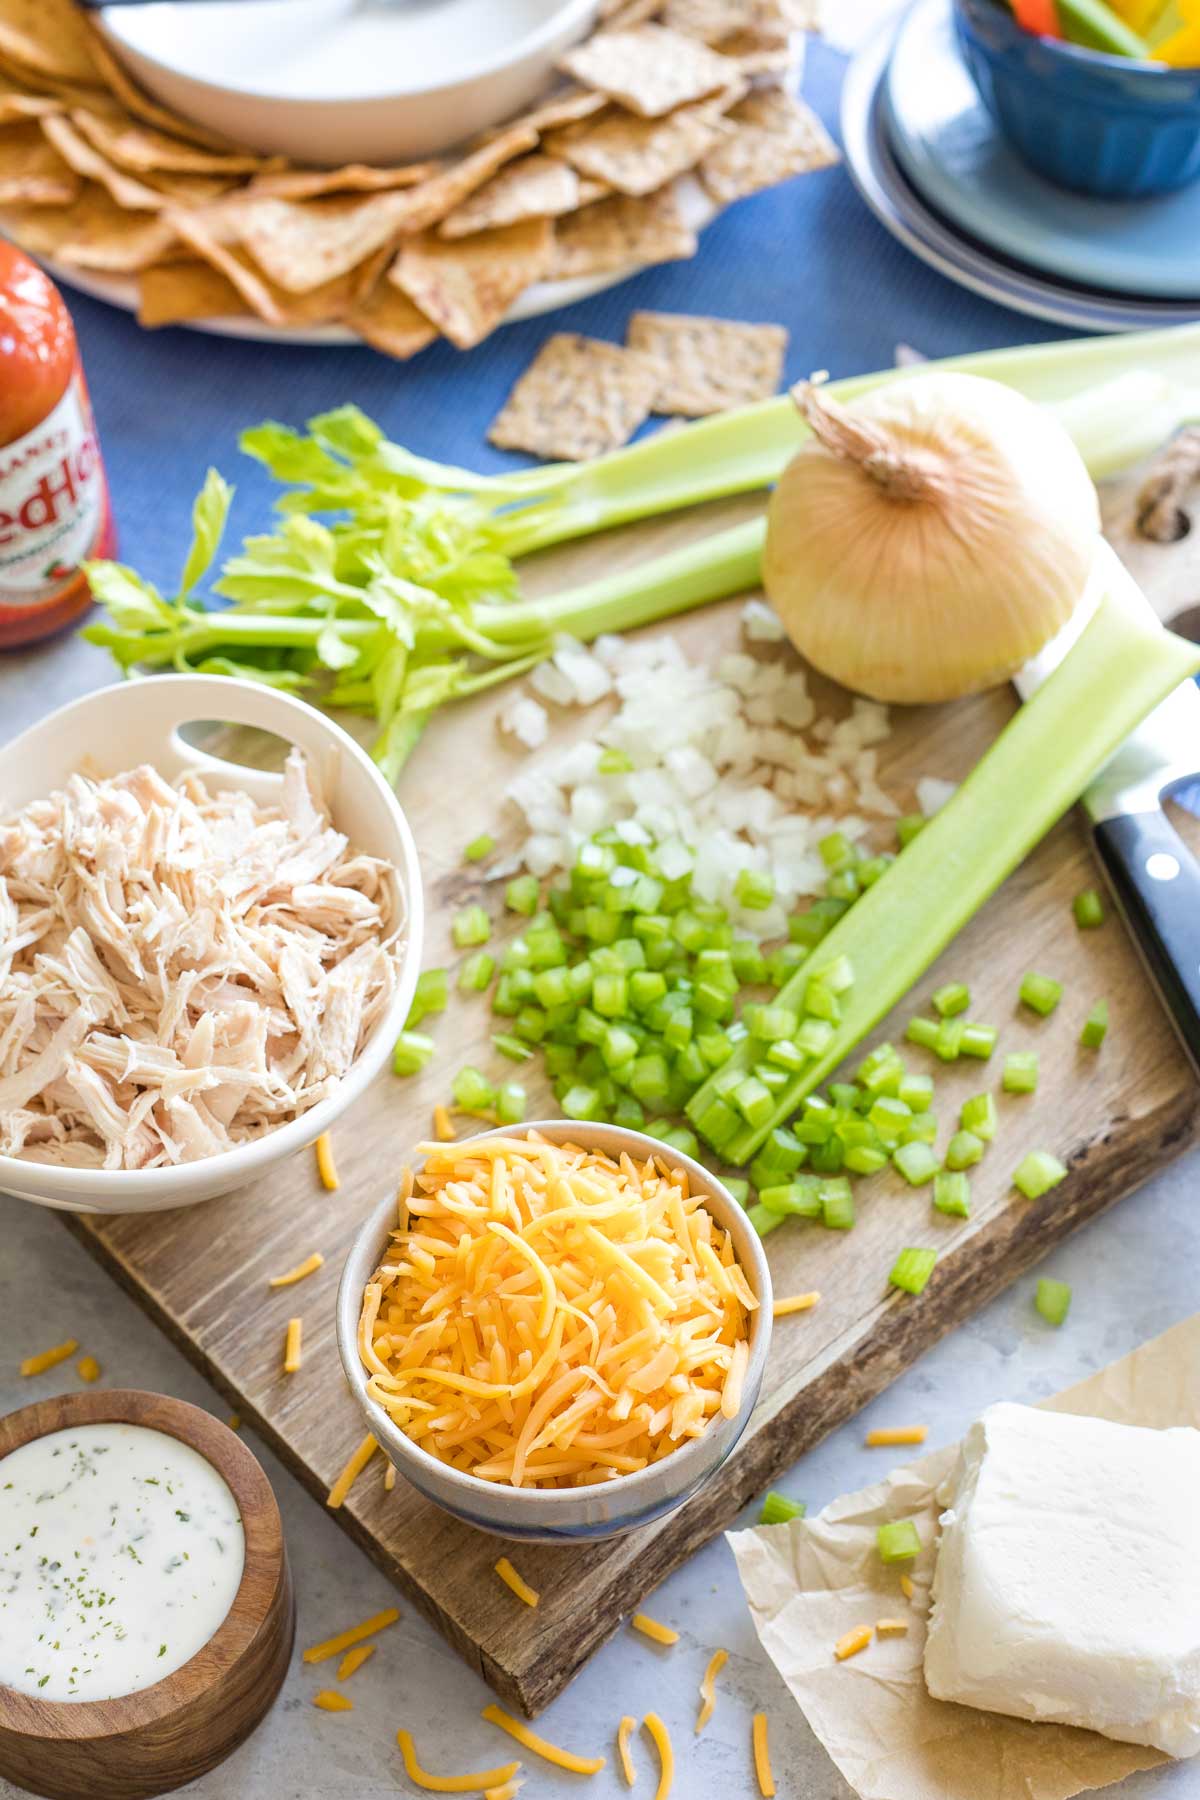 Ingredients on a wooden cutting board: shredded cheese and chicken, veggies, ranch and cream cheese, with a bottle of buffalo hot sauce in the background with dippers.